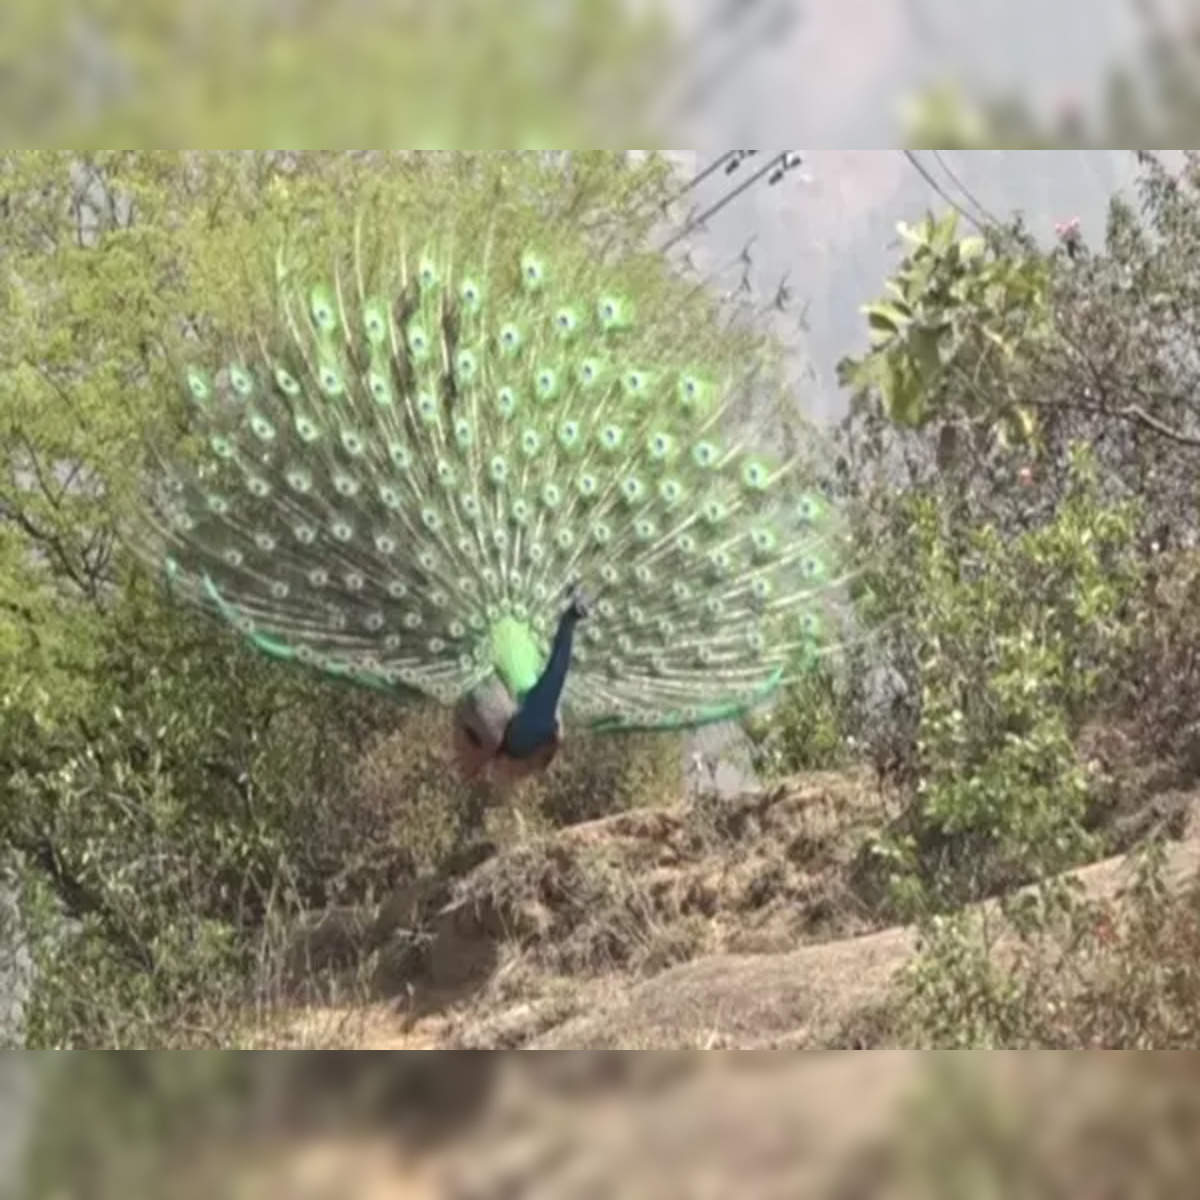 Peacock feathers look amazing under microscope in viral clip